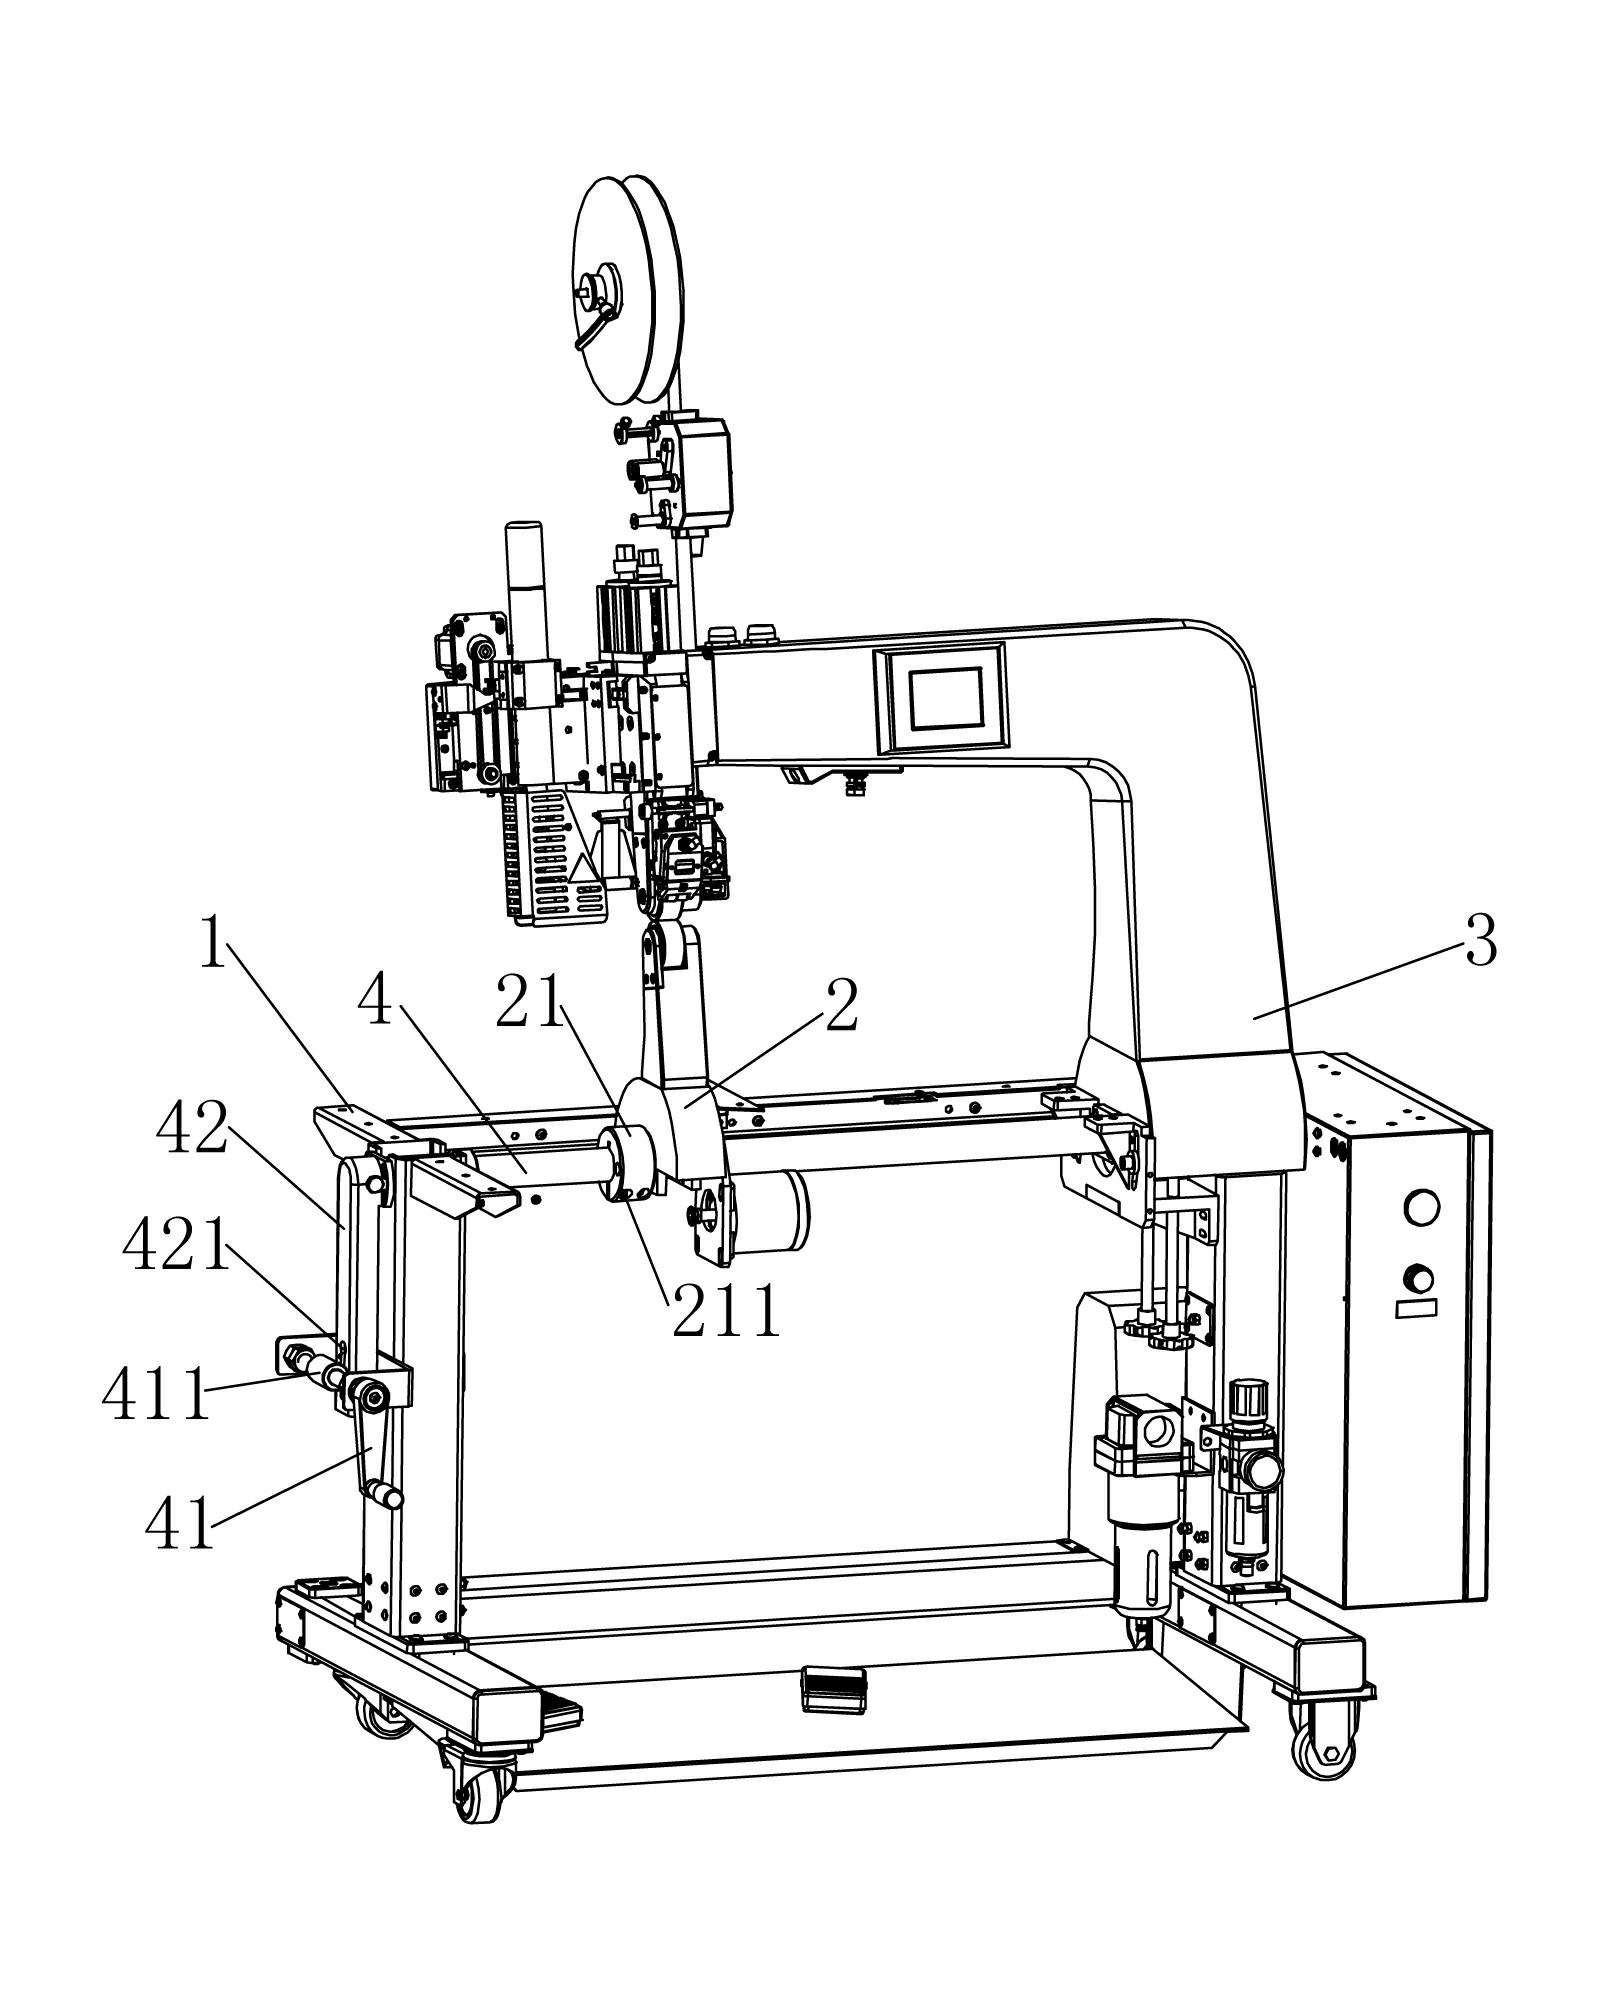 Rotating structure of bevel gauge and lower prop of hot air seam sealing machine